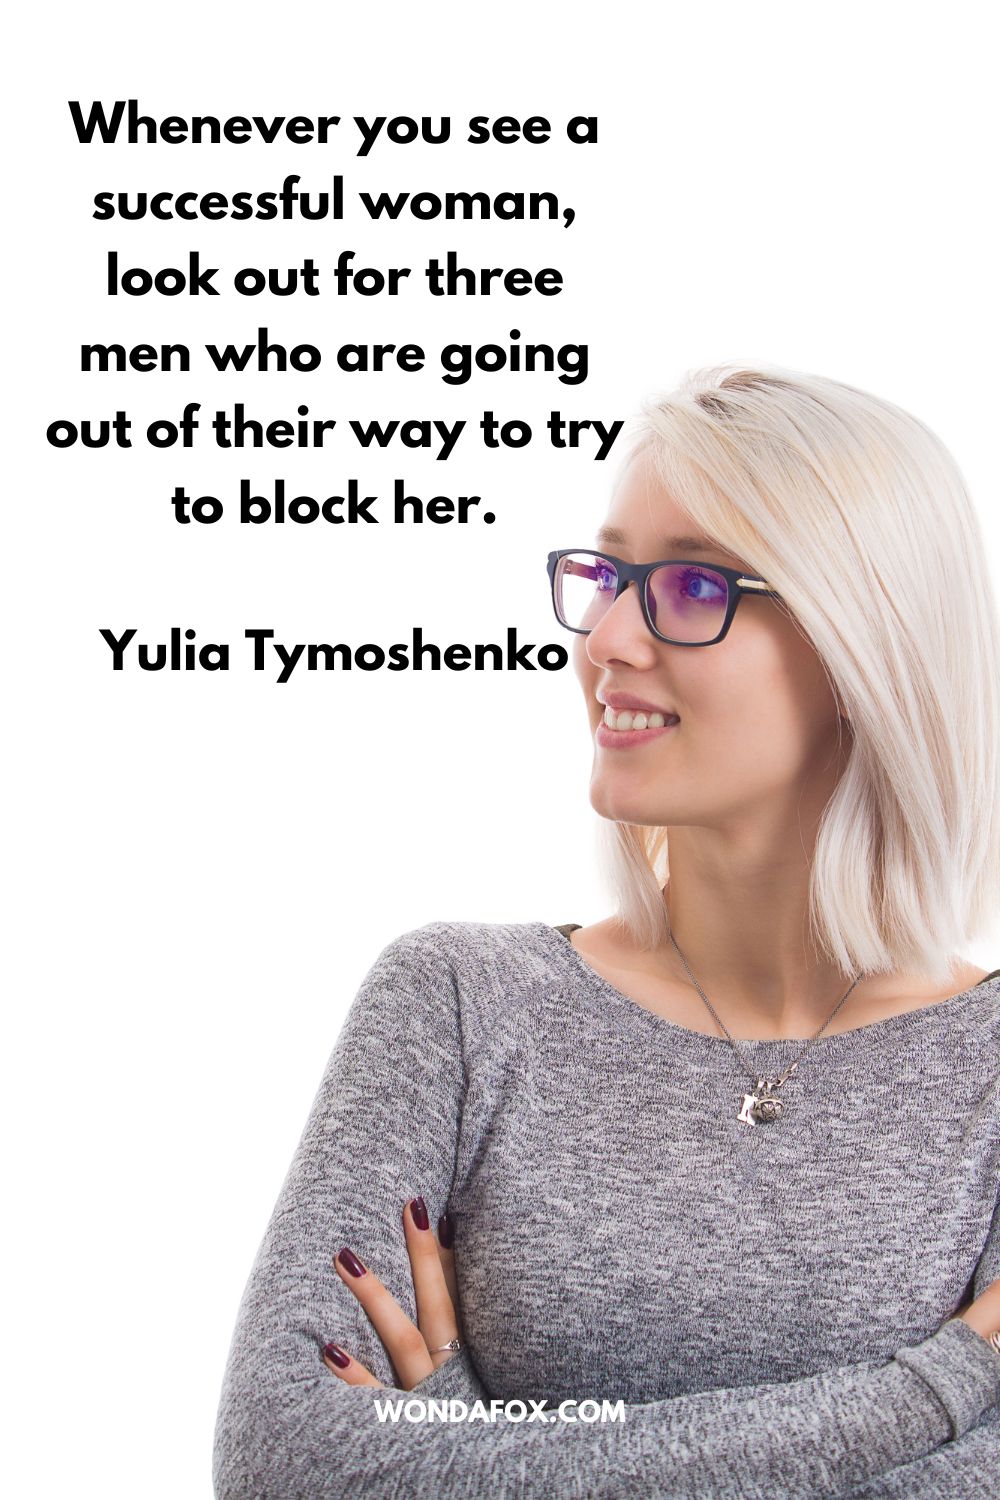 Whenever you see a successful woman, look out for three men who are going out of their way to try to block her. Yulia Tymoshenko